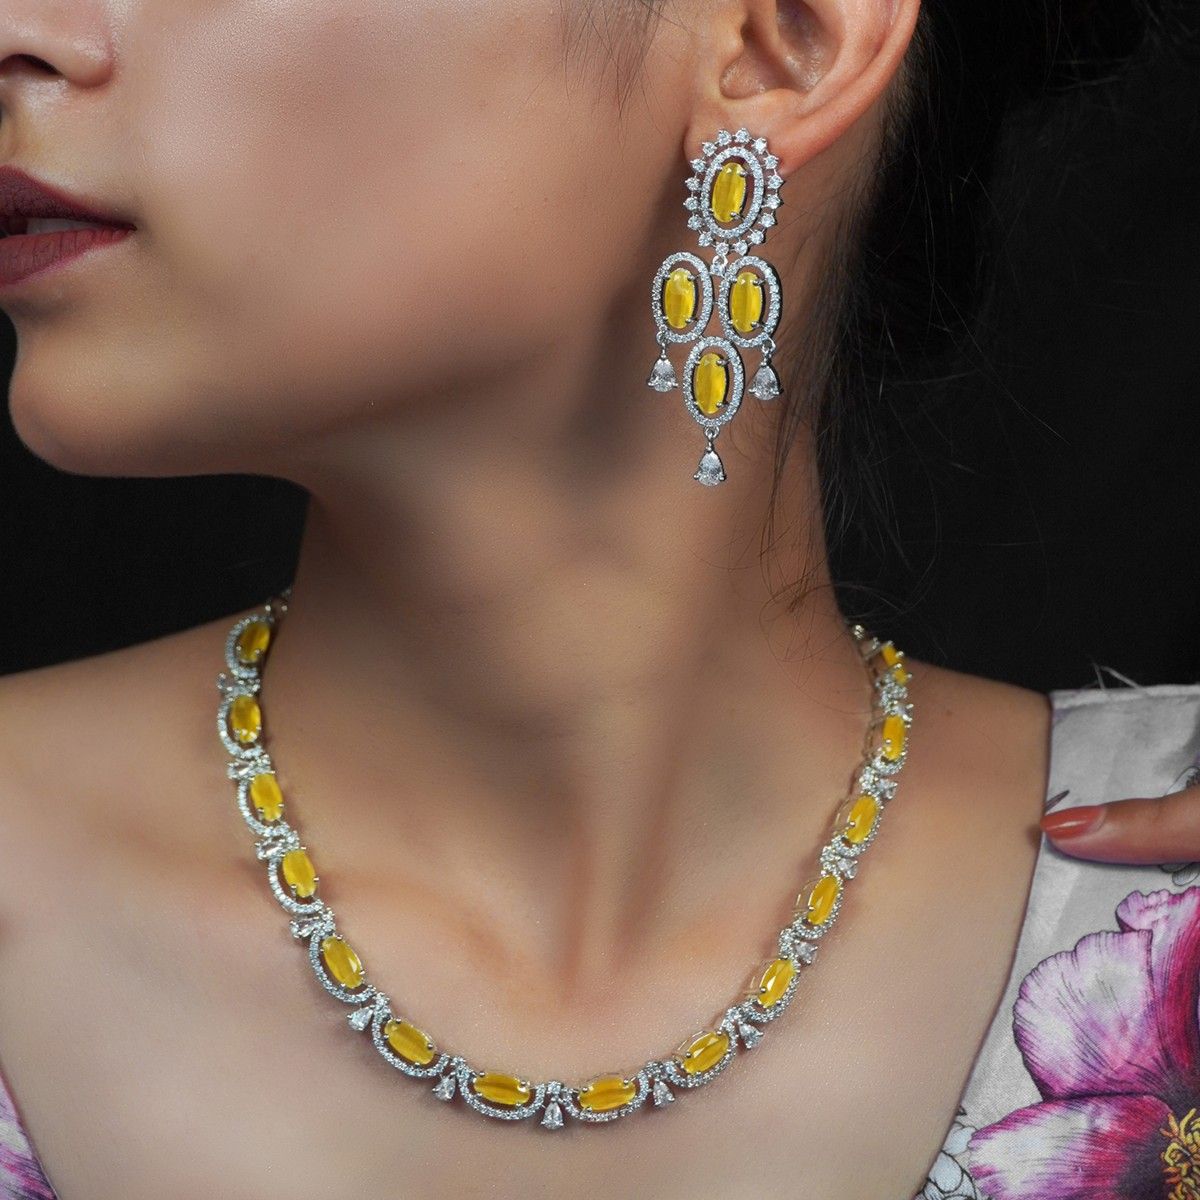 Exquisite Custom Made Necklace with 35.31 Carat Fancy Intense Yellow Pear  Shape